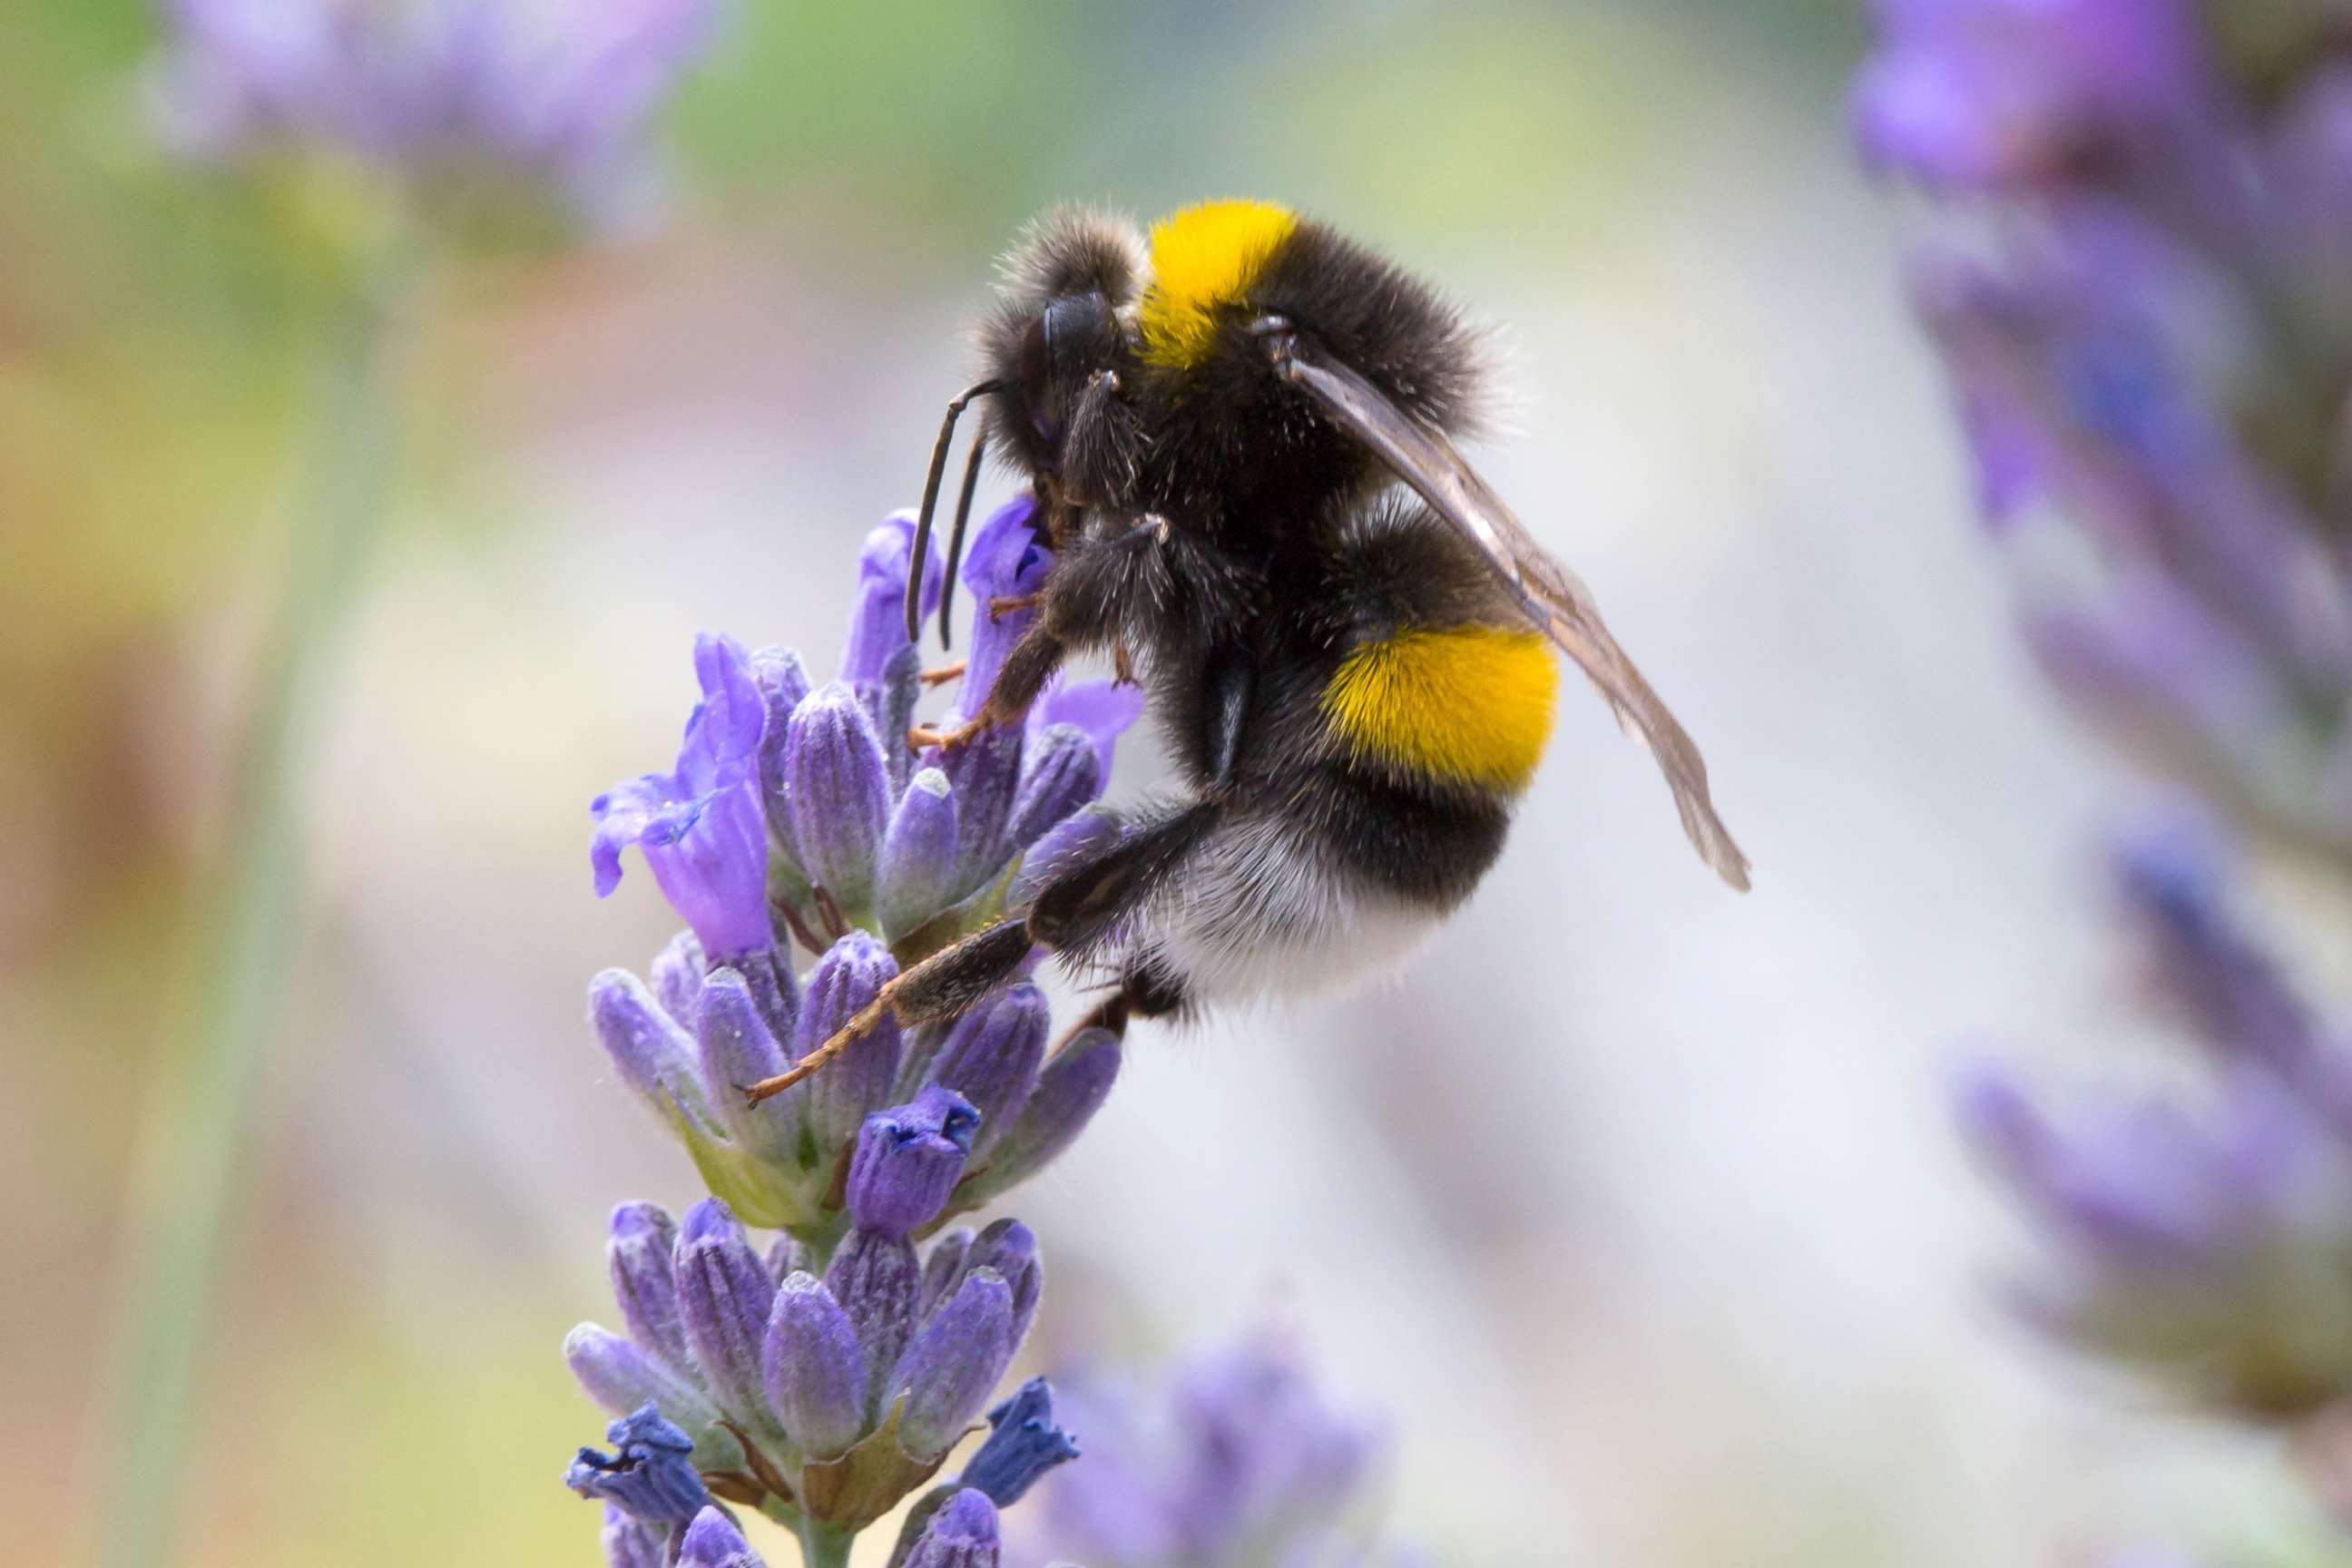 PHOTO: A bumblebee gathers pollen from a flower in this undated stock photo.